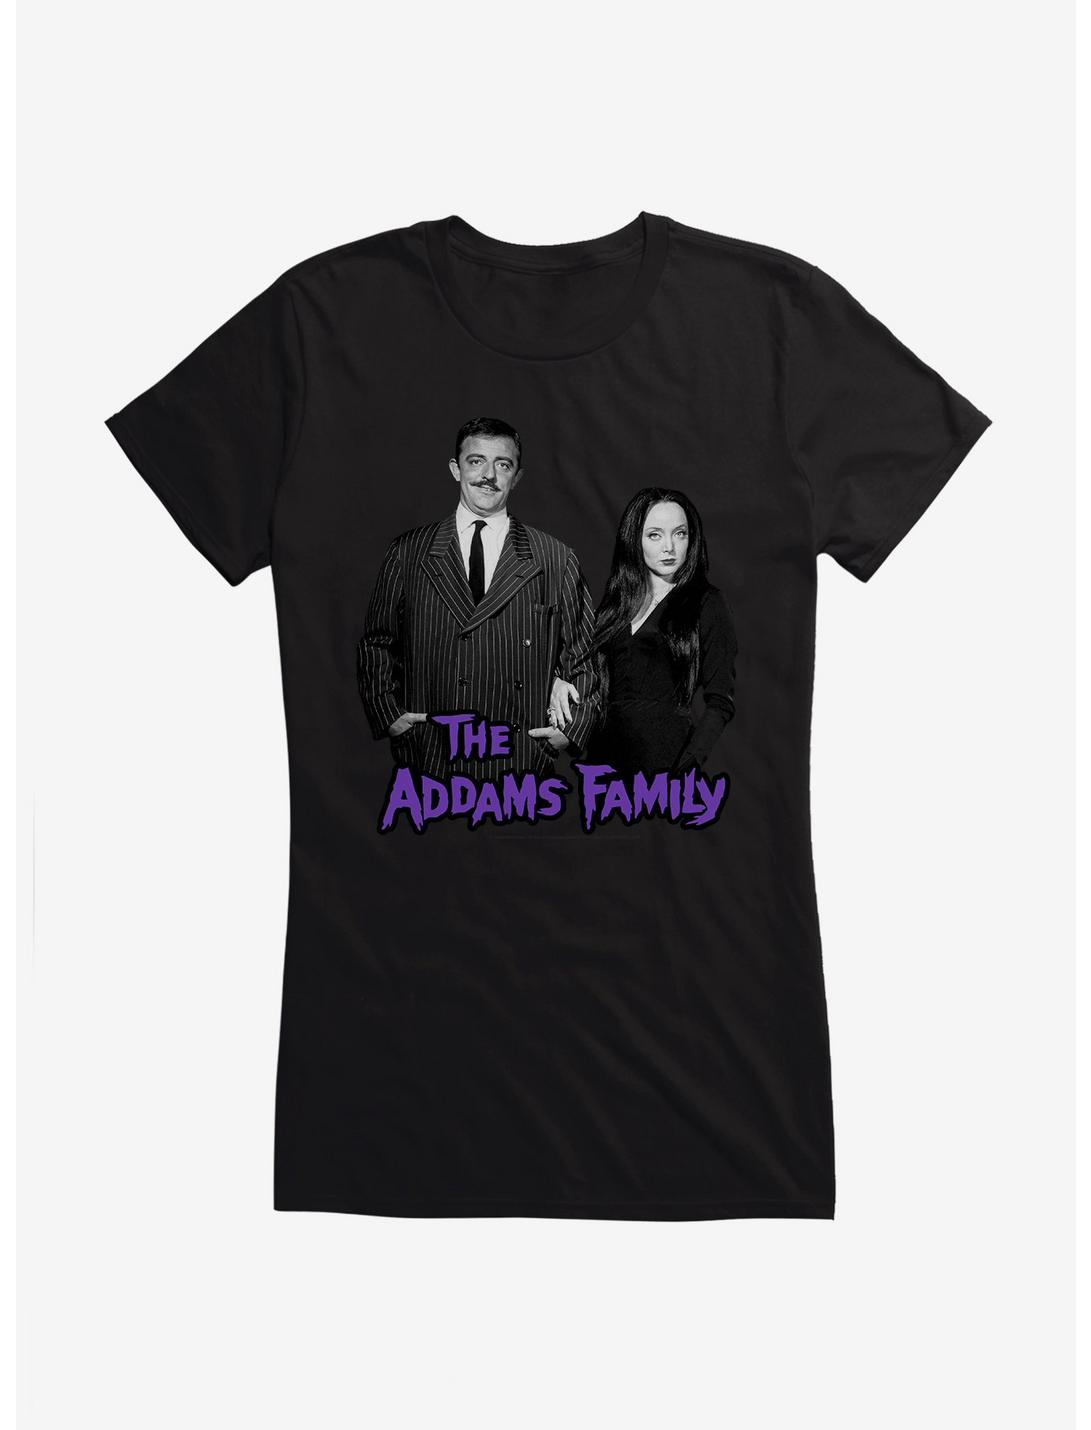 The Addams Family Gomez And Morticia Addams Girls T-Shirt, BLACK, hi-res